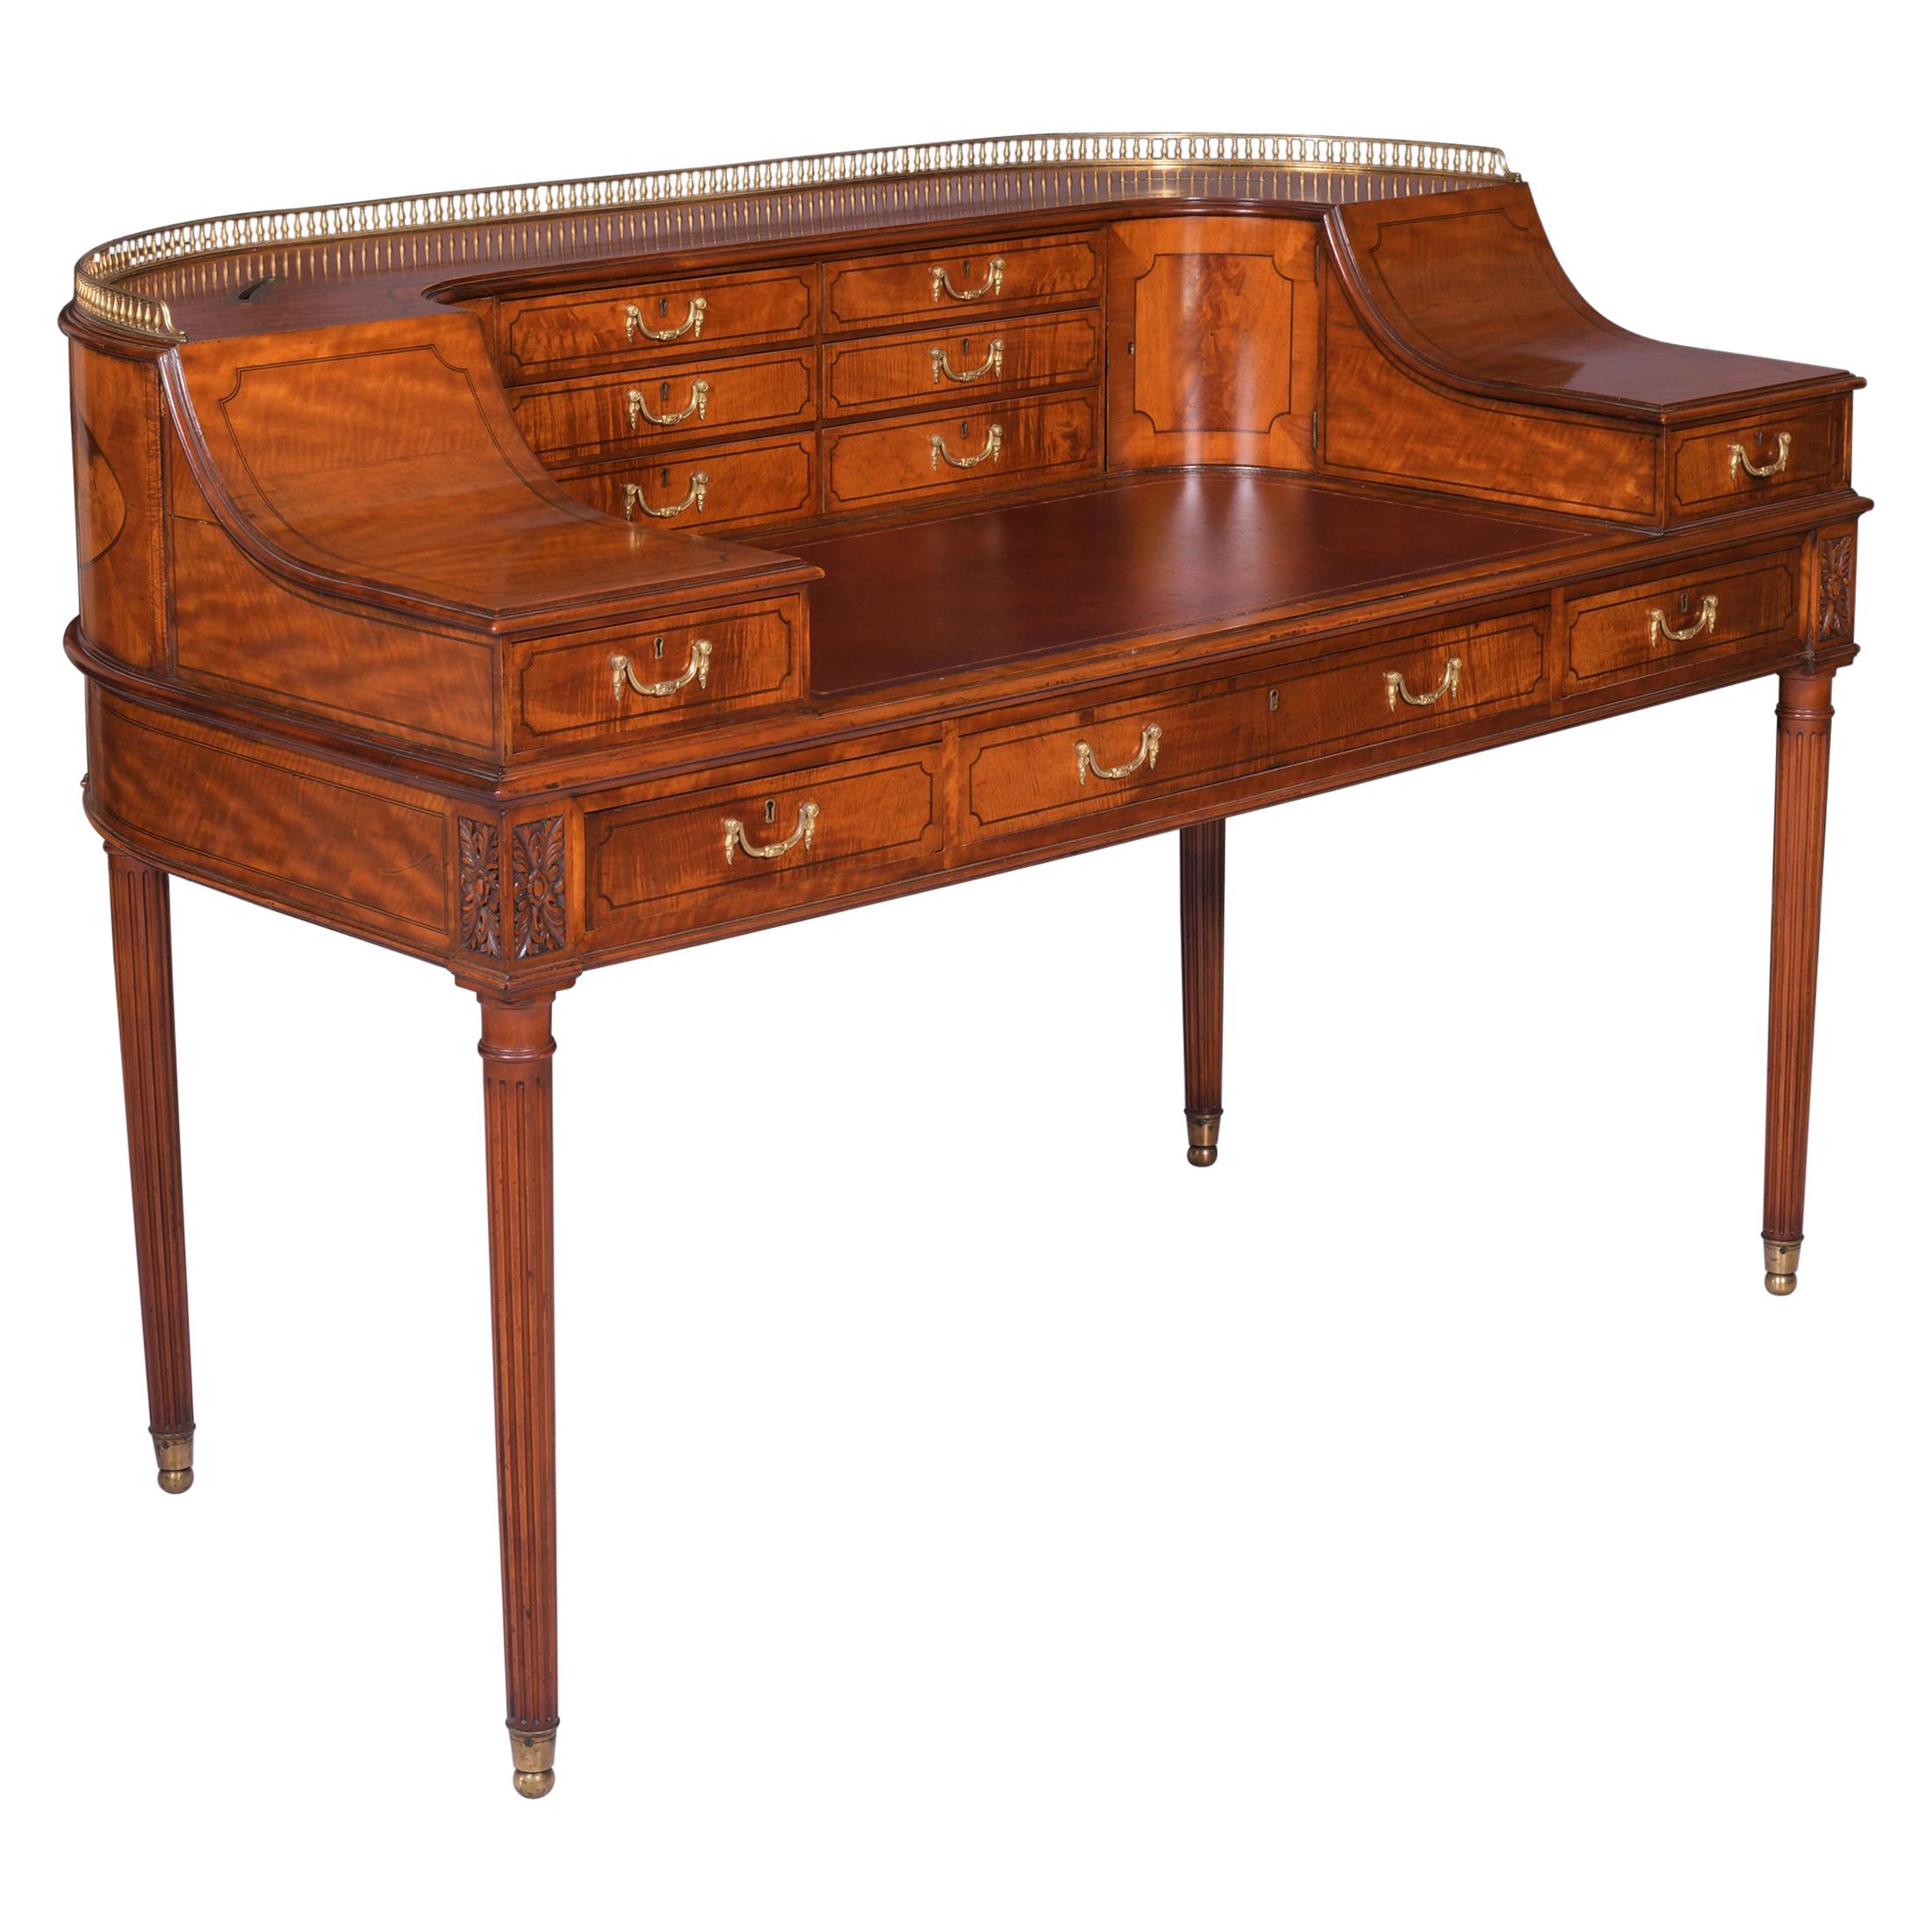 19th Century English Satinwood Carlton House Desk Attributed to Gillows